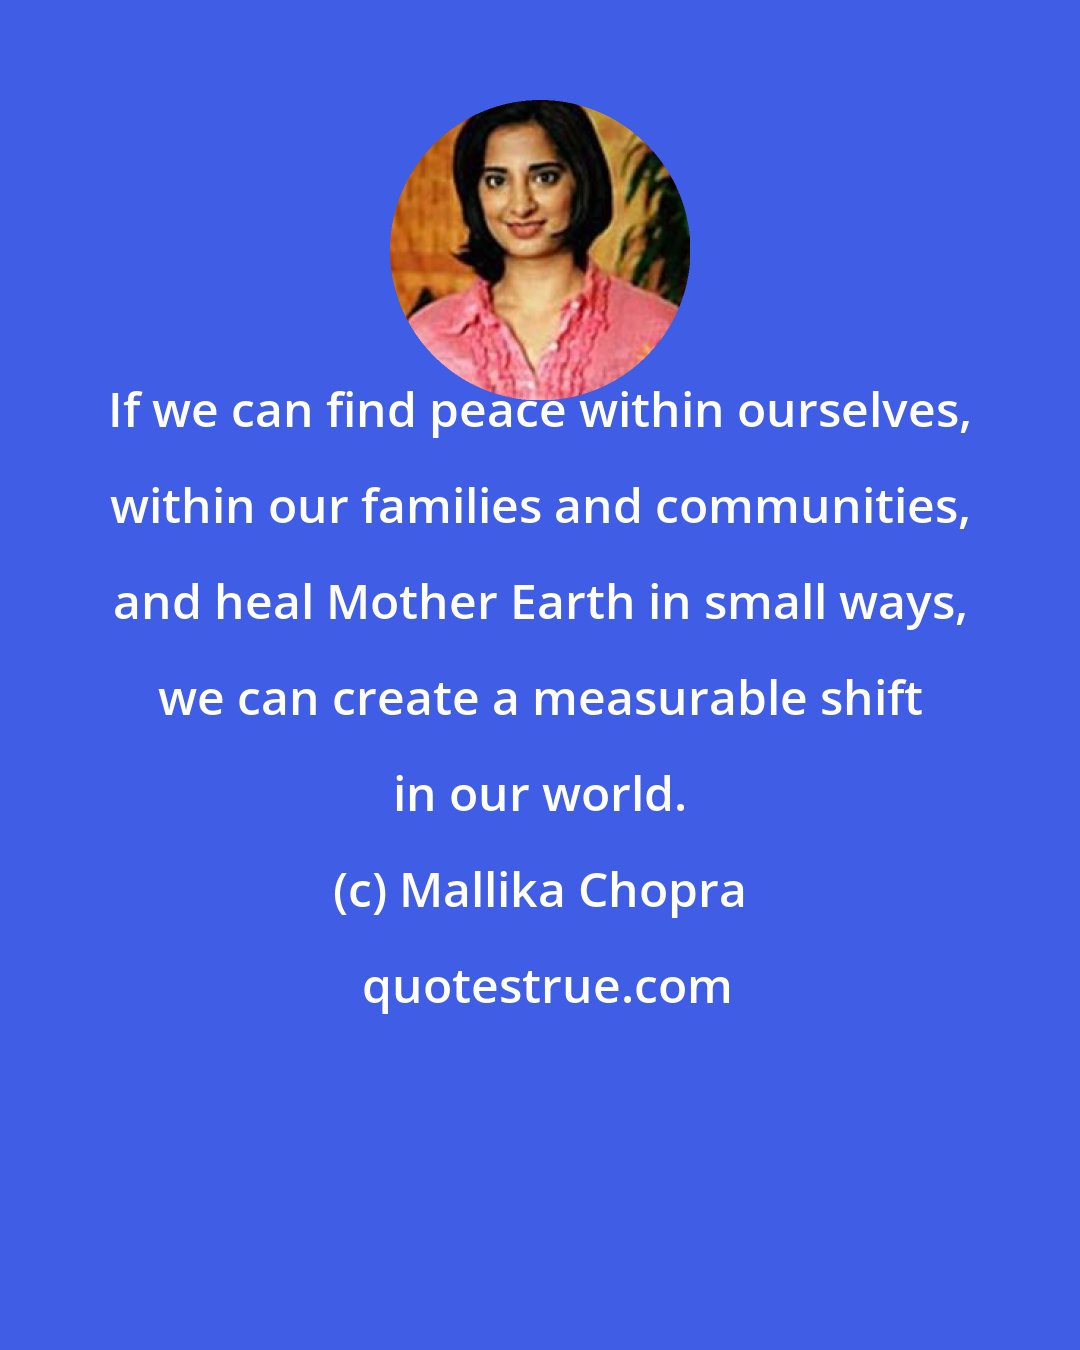 Mallika Chopra: If we can find peace within ourselves, within our families and communities, and heal Mother Earth in small ways, we can create a measurable shift in our world.